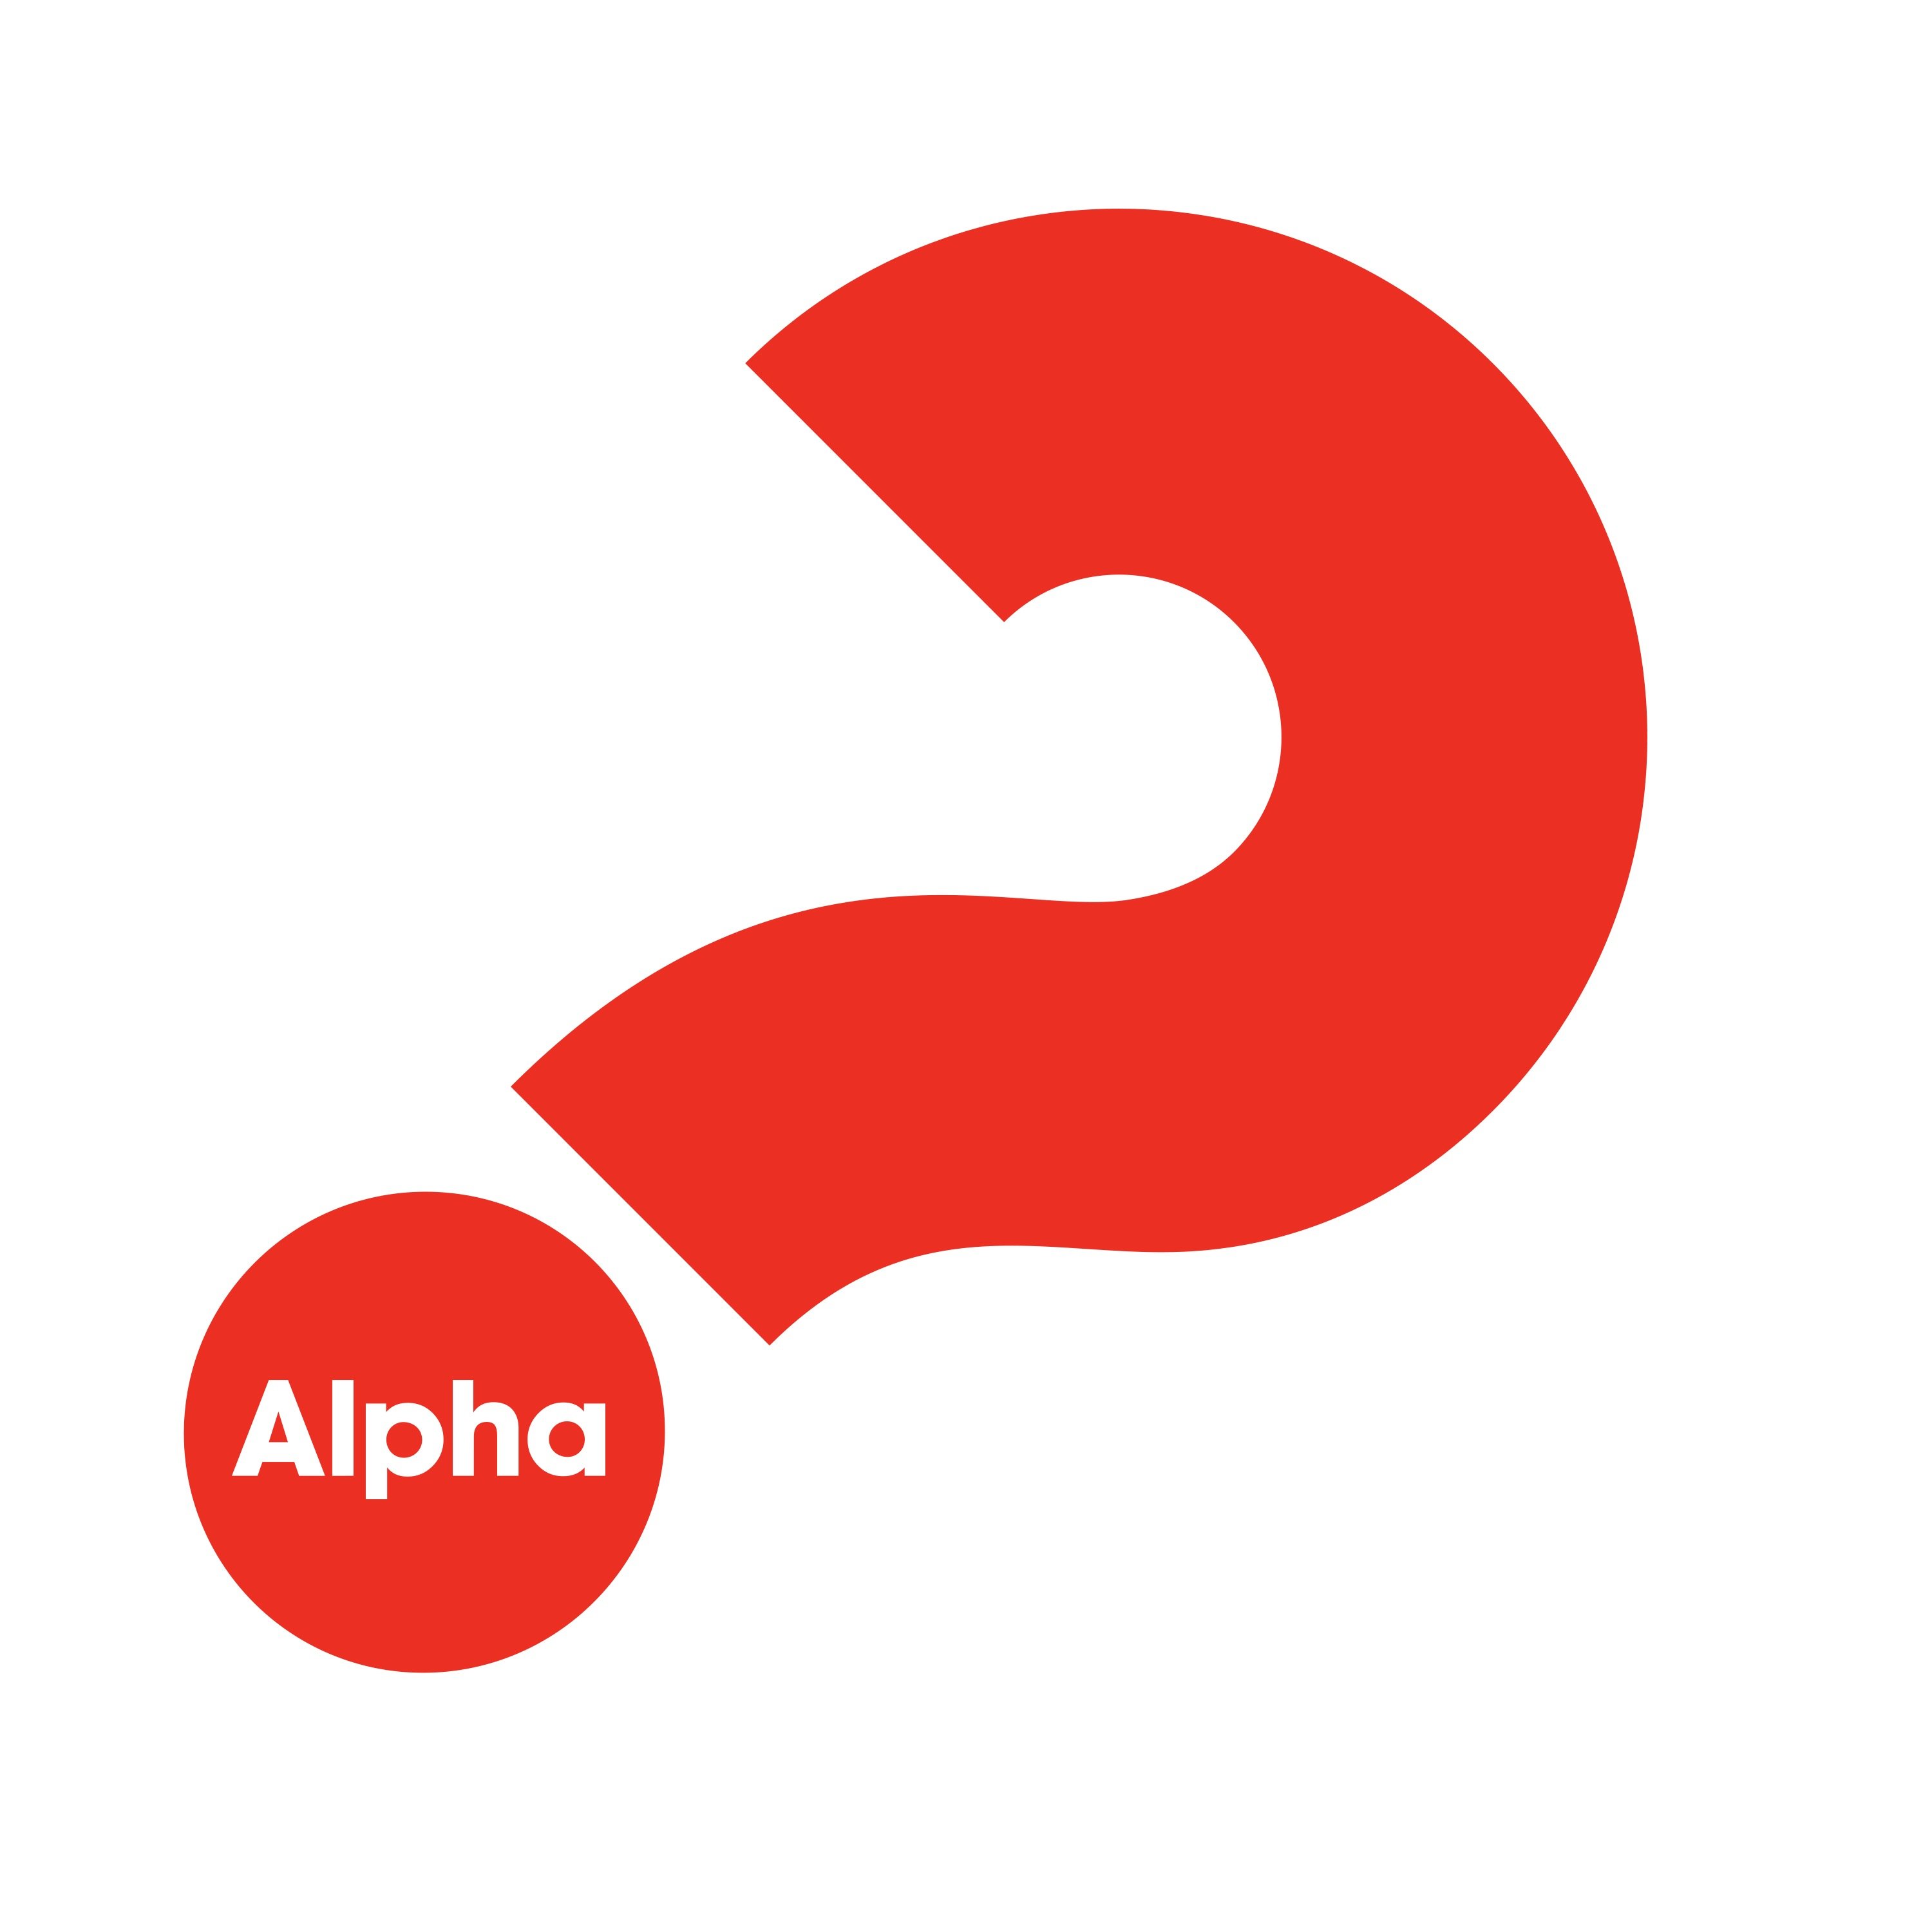 #Alpha is a series of interactive sessions that explore the Meaning of Life. 
Alpha is a worldwide phenomenon 
169 countries
24 million people #TryAlpha